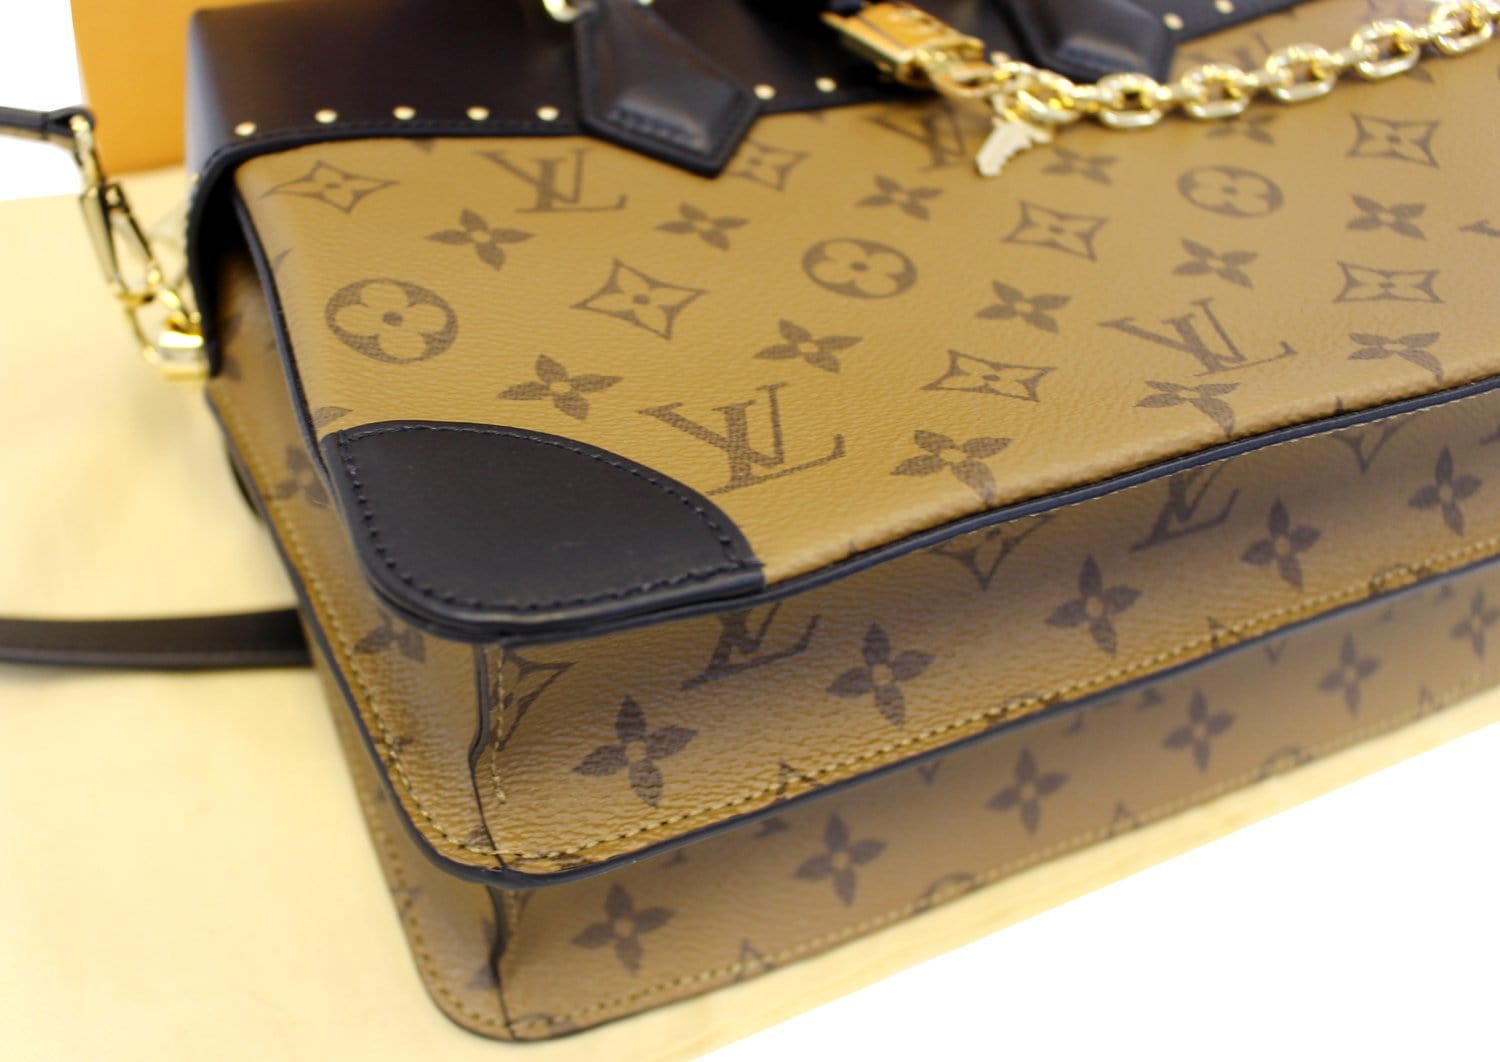 Louis Vuitton Trunk Clutch of Reverse Monogram Canvas with Polished Brass  Hardware, Handbags & Accessories Online, Ecommerce Retail